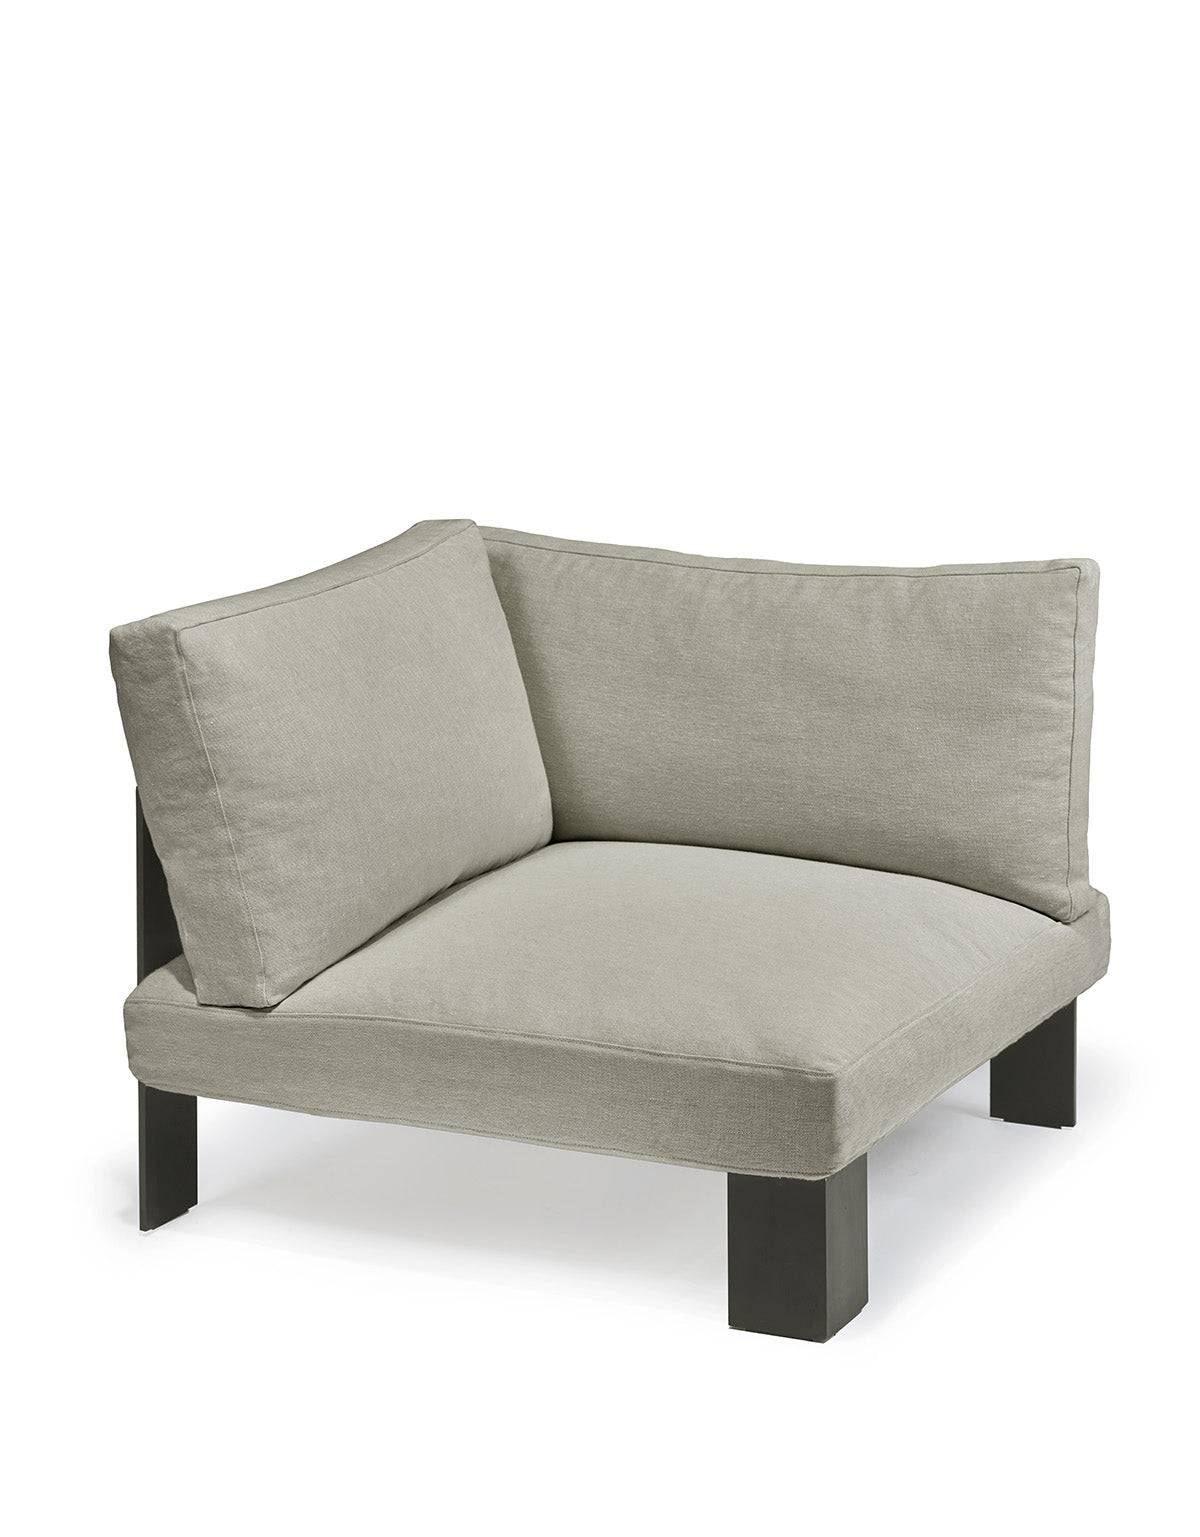 Mombaers Sofa - Taupe - THAT COOL LIVING